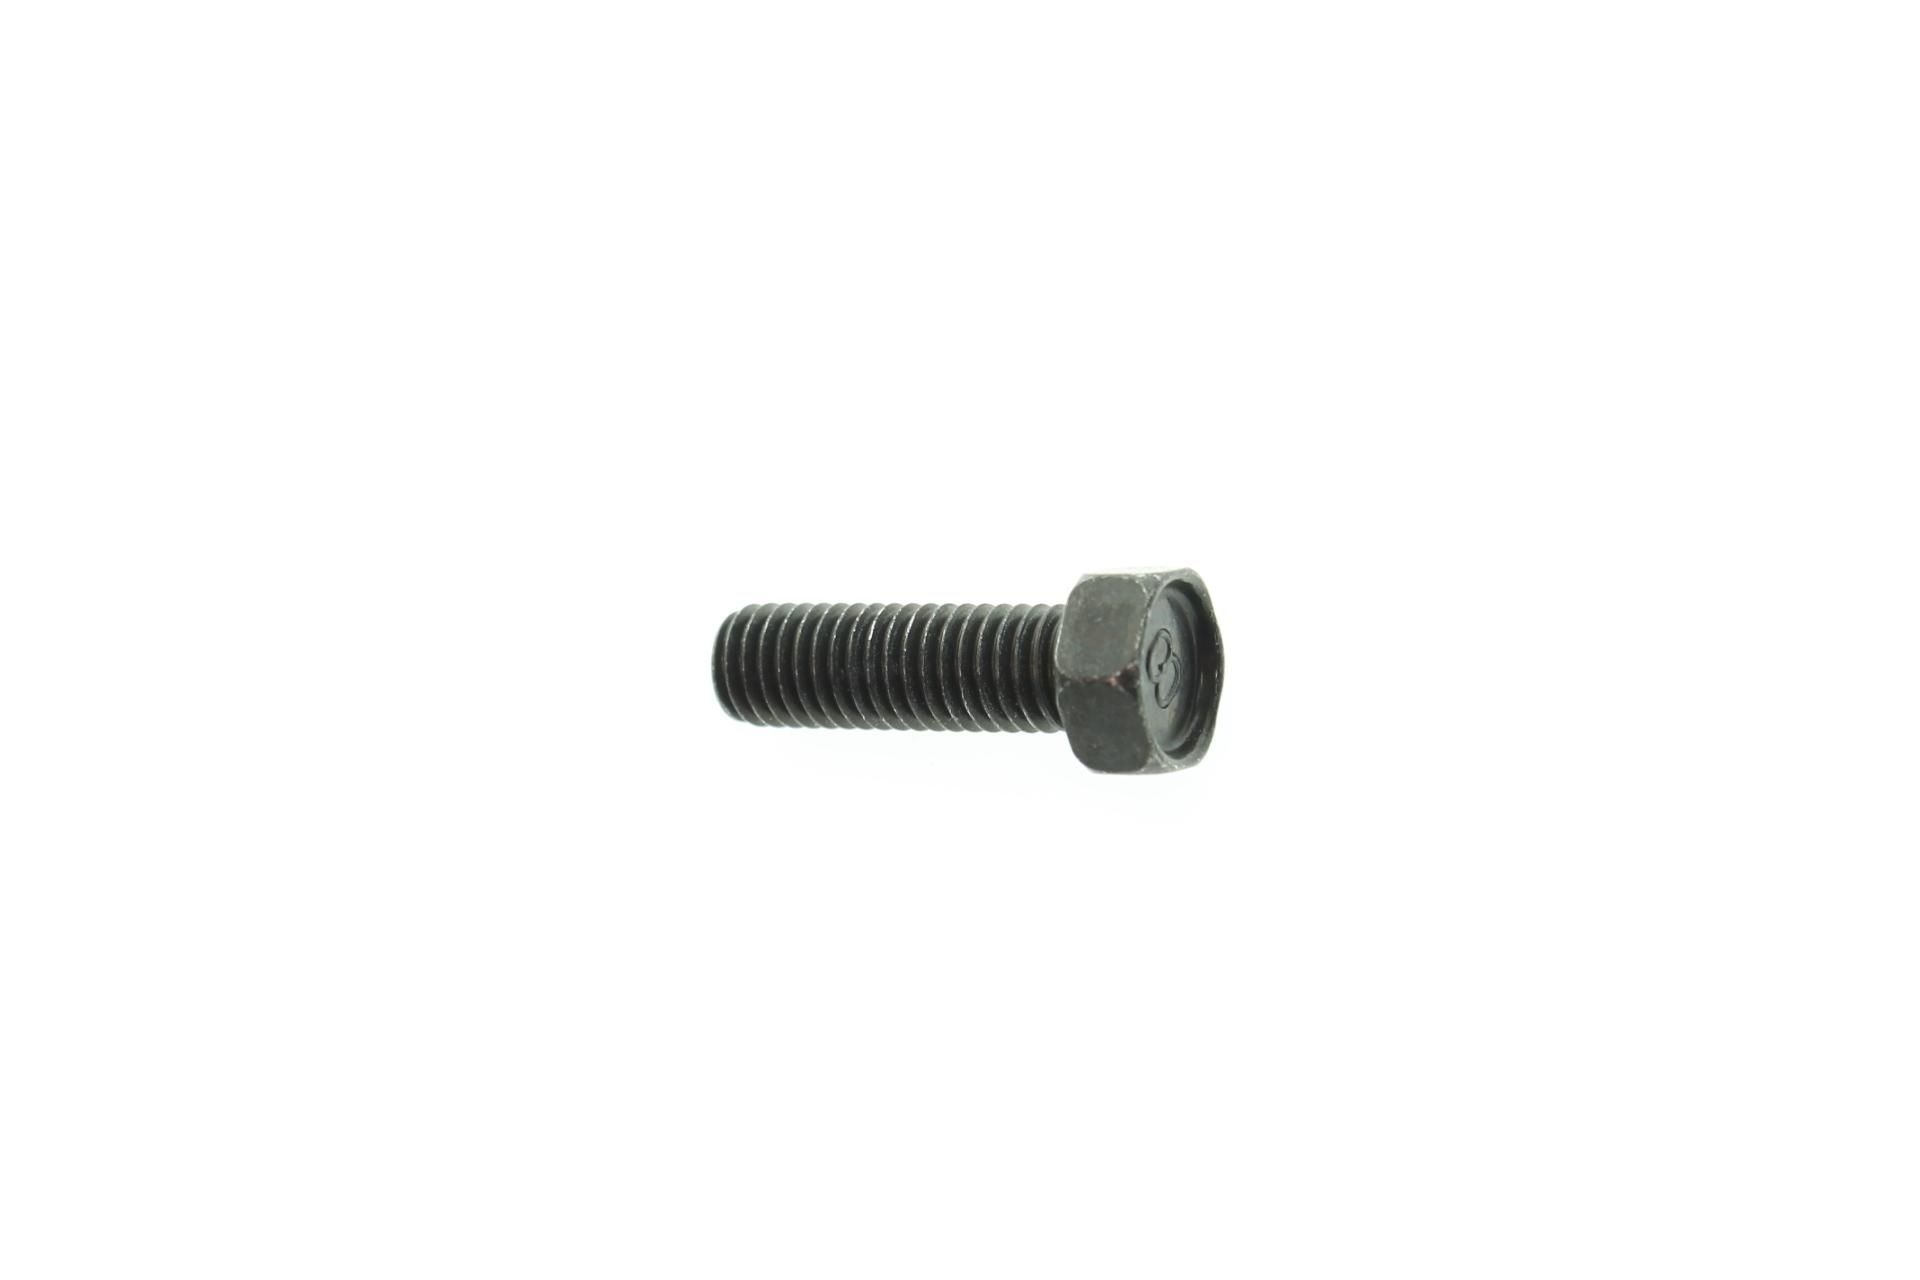 97206-08025-00 Superseded by 97017-08025-00 - BOLT